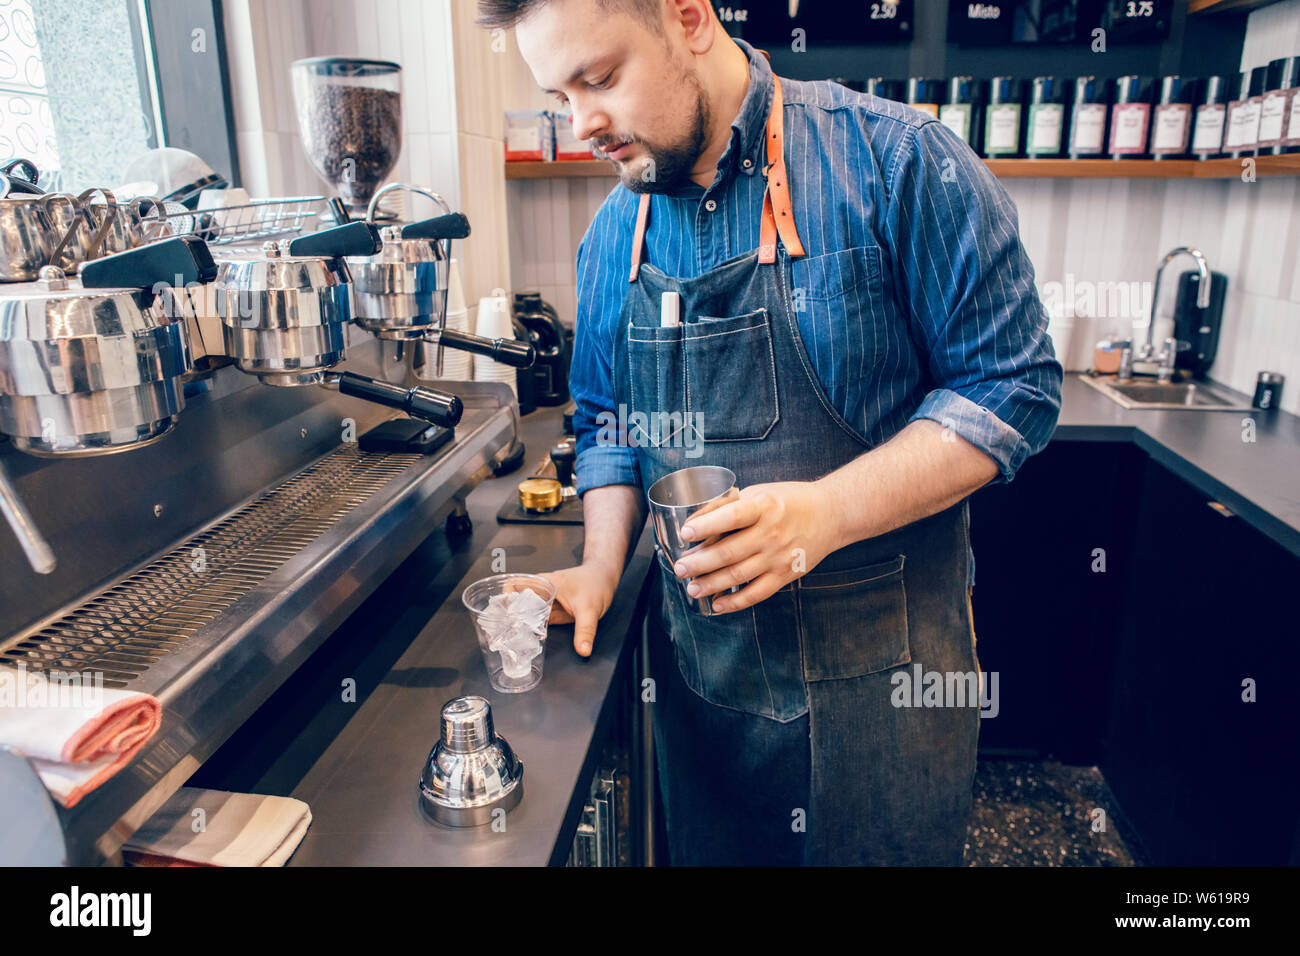 https://c8.alamy.com/comp/W619R9/caucasian-handsome-bearded-man-barista-making-cold-iced-coffee-cappuccino-latte-in-shaker-waiter-server-pouring-drink-in-plastic-transparent-cup-sma-W619R9.jpg